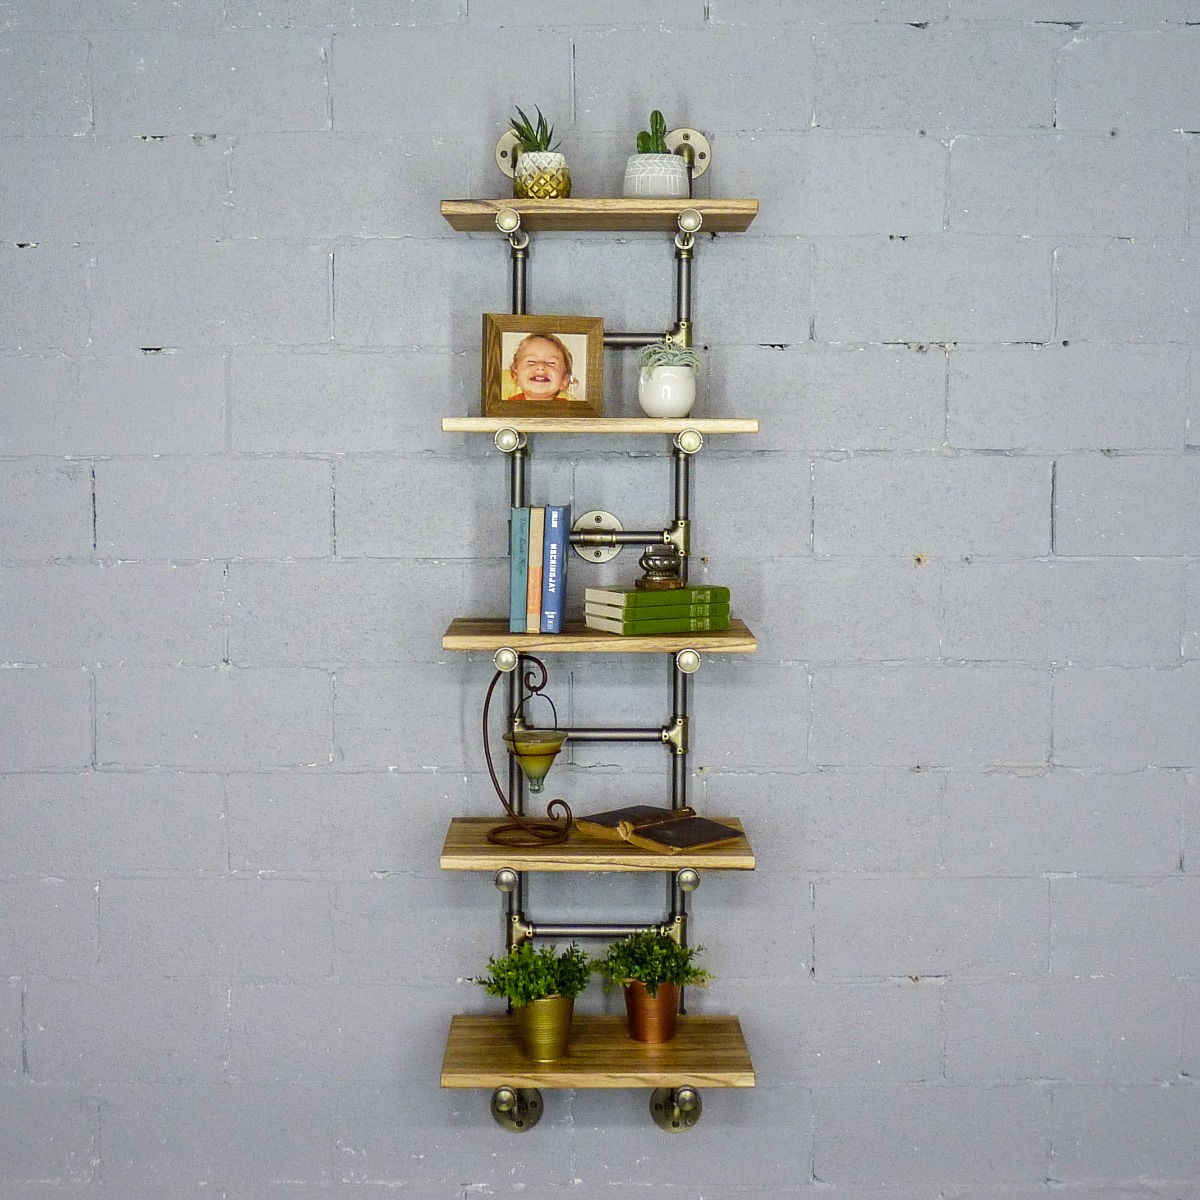 Swu1-br-gr-na Phoenix Modern Industrial Ladder Wall Mounted Bookcase, Brushed Brass Gray Steel Combo With Natural Stained Wood